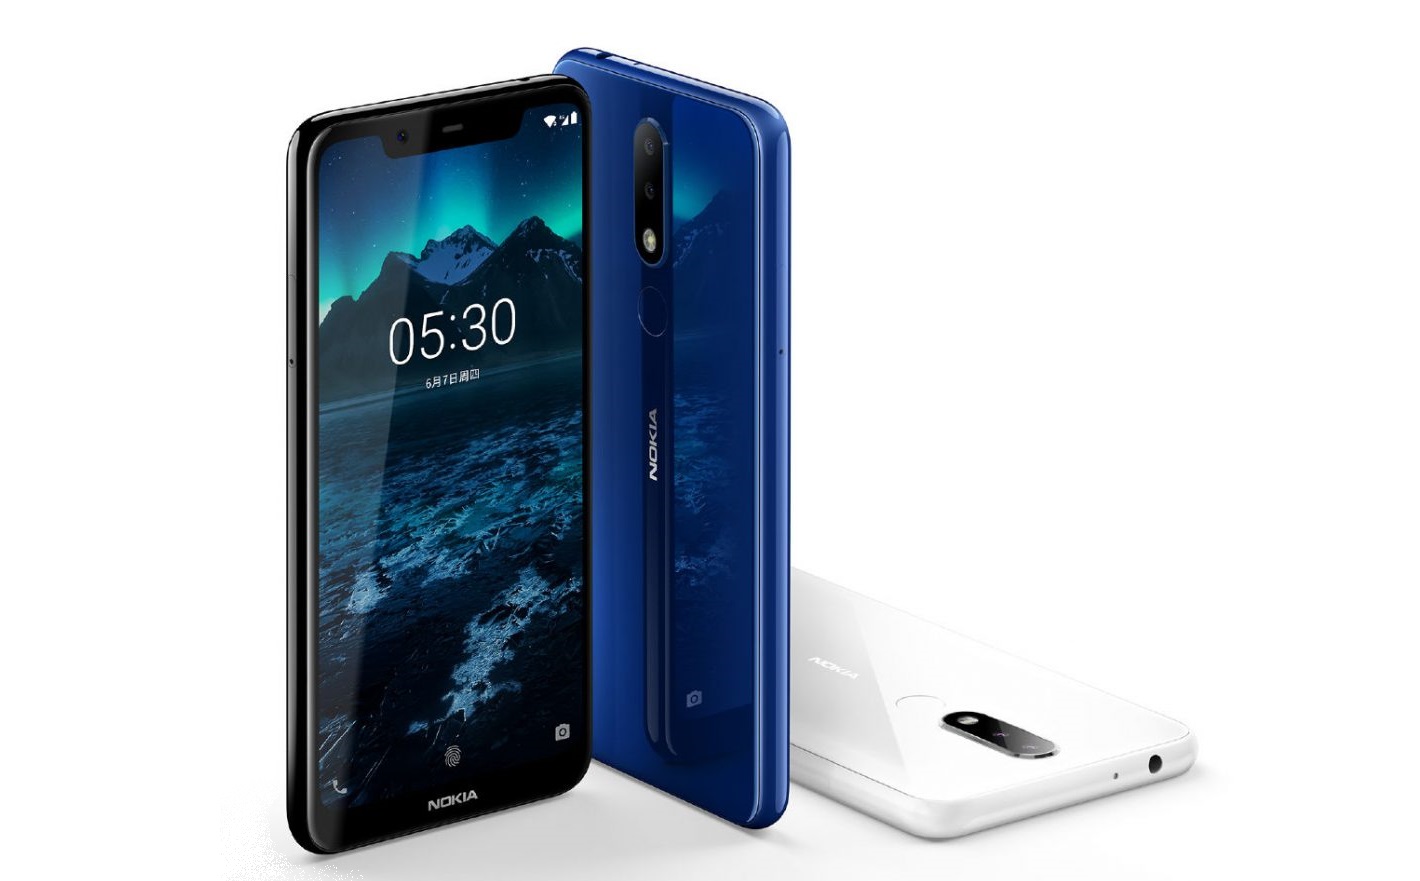 A Nokia X5 press photo in blue, black and white.